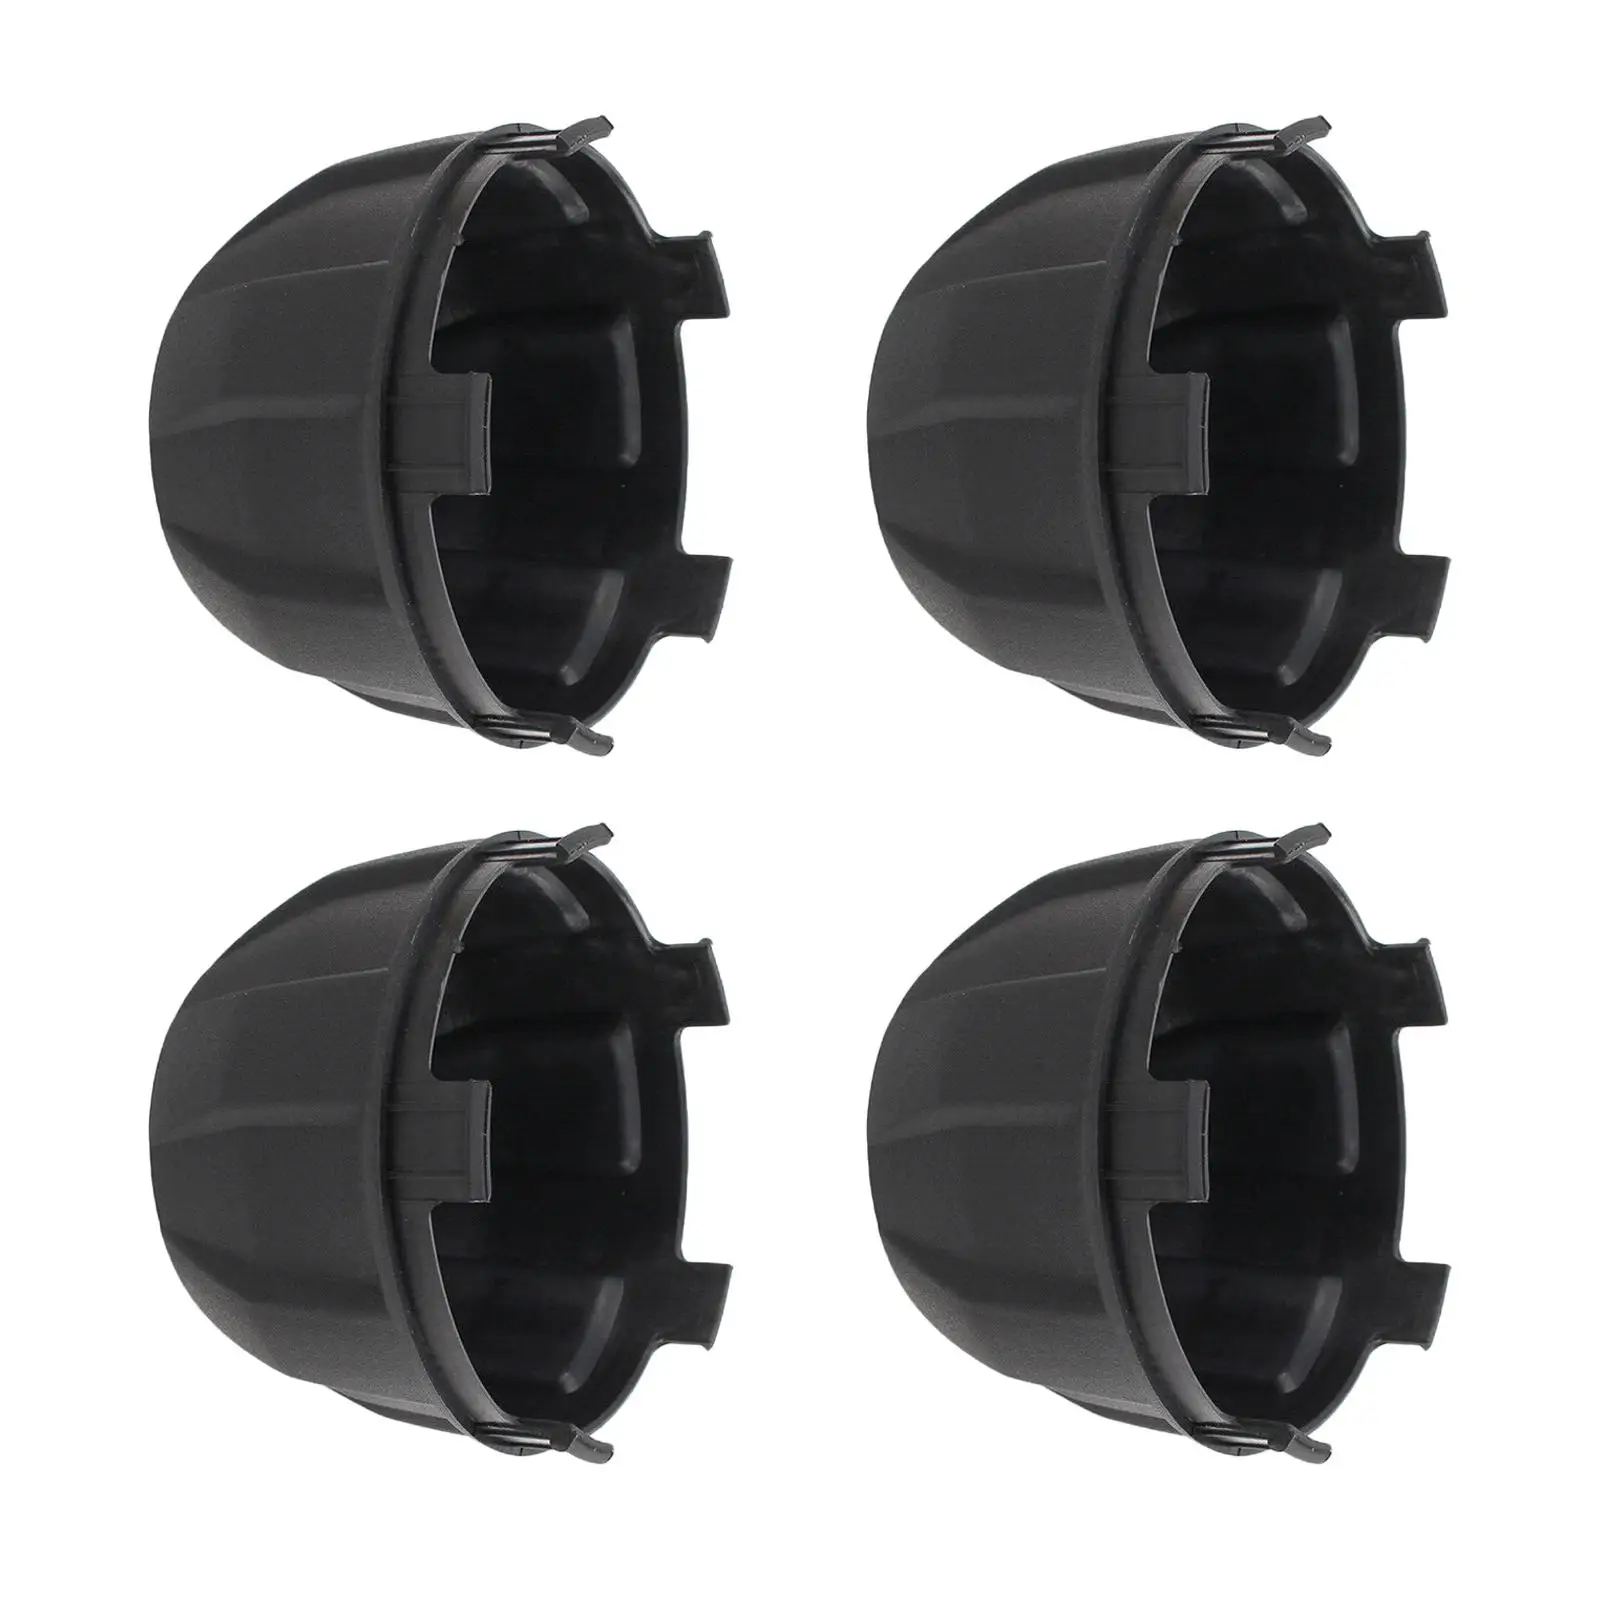 4 Pieces Wheel Center Hub Caps Motorcycle Assembly for Kawasaki Accessory Accessories Long Service Life Easily Install premium